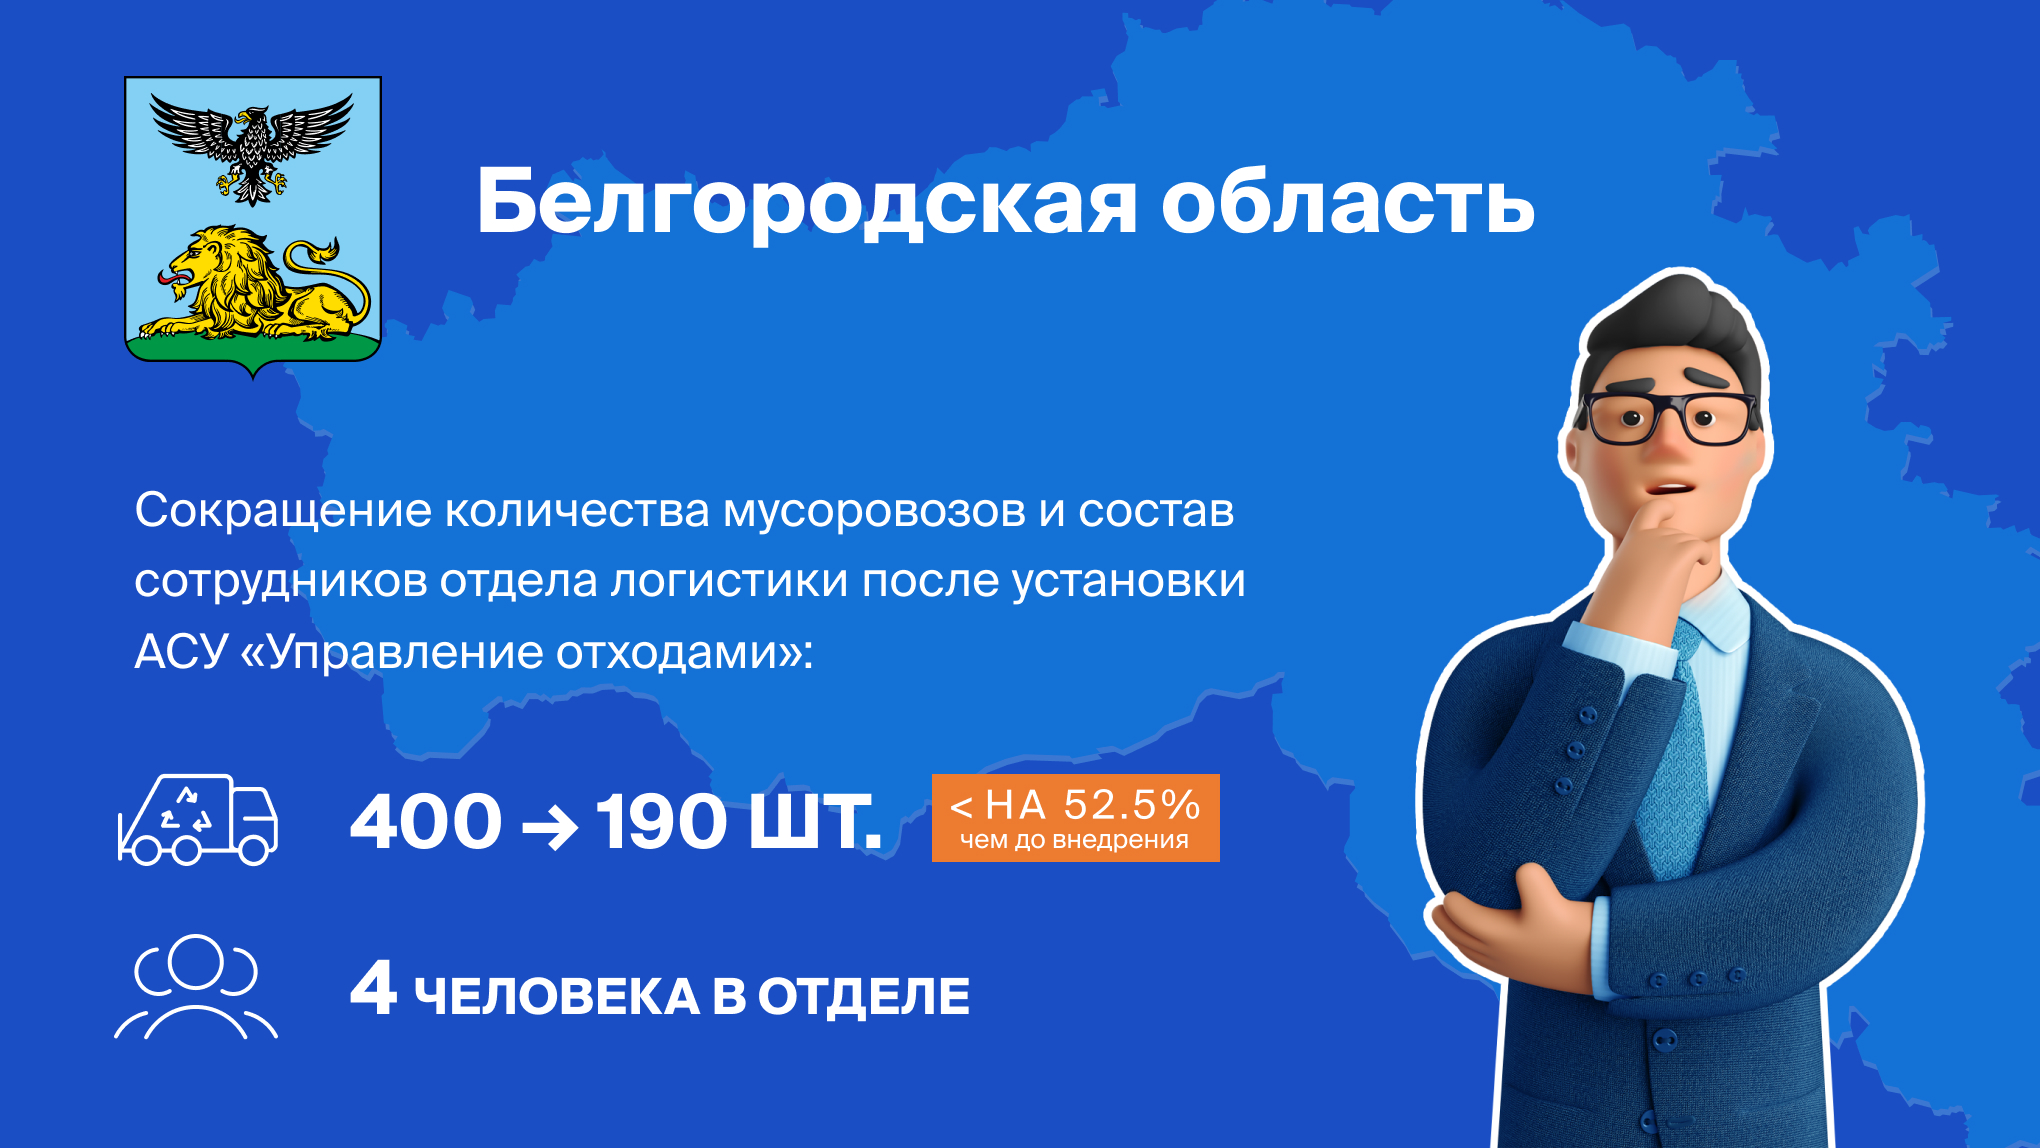 Results of product implementation in Belgorod region